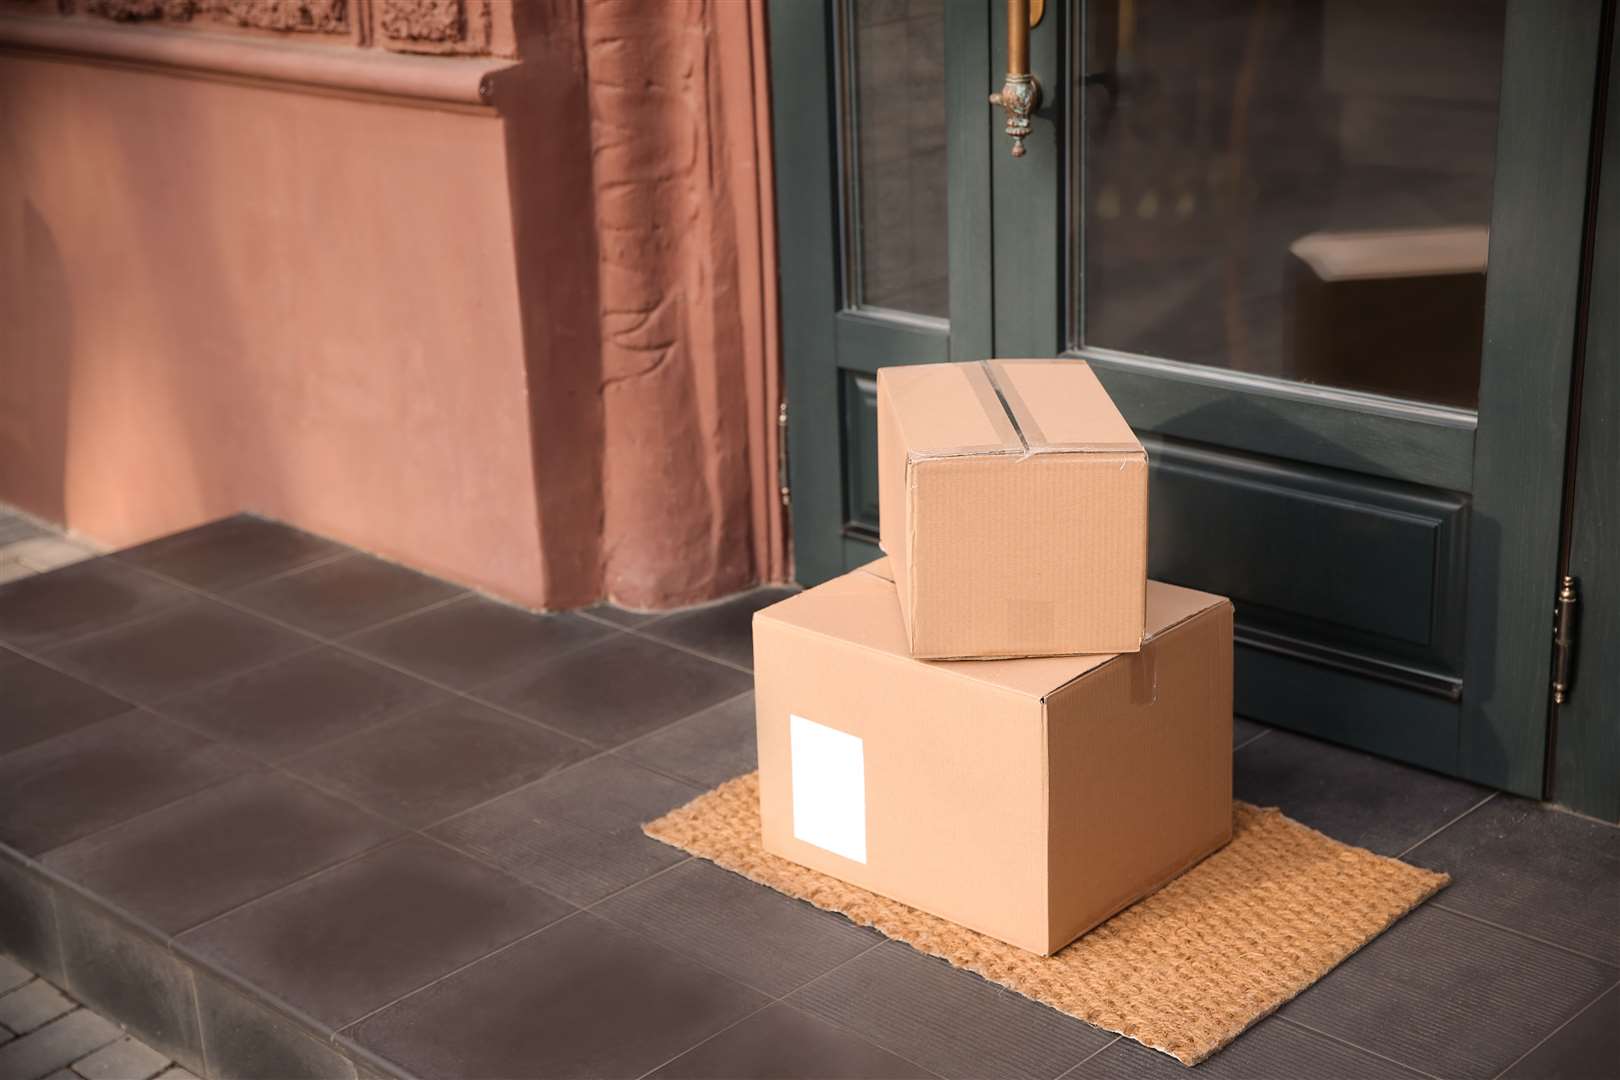 Menzies Parcels was established five years ago in an effort to tackle unfair delivery charges.